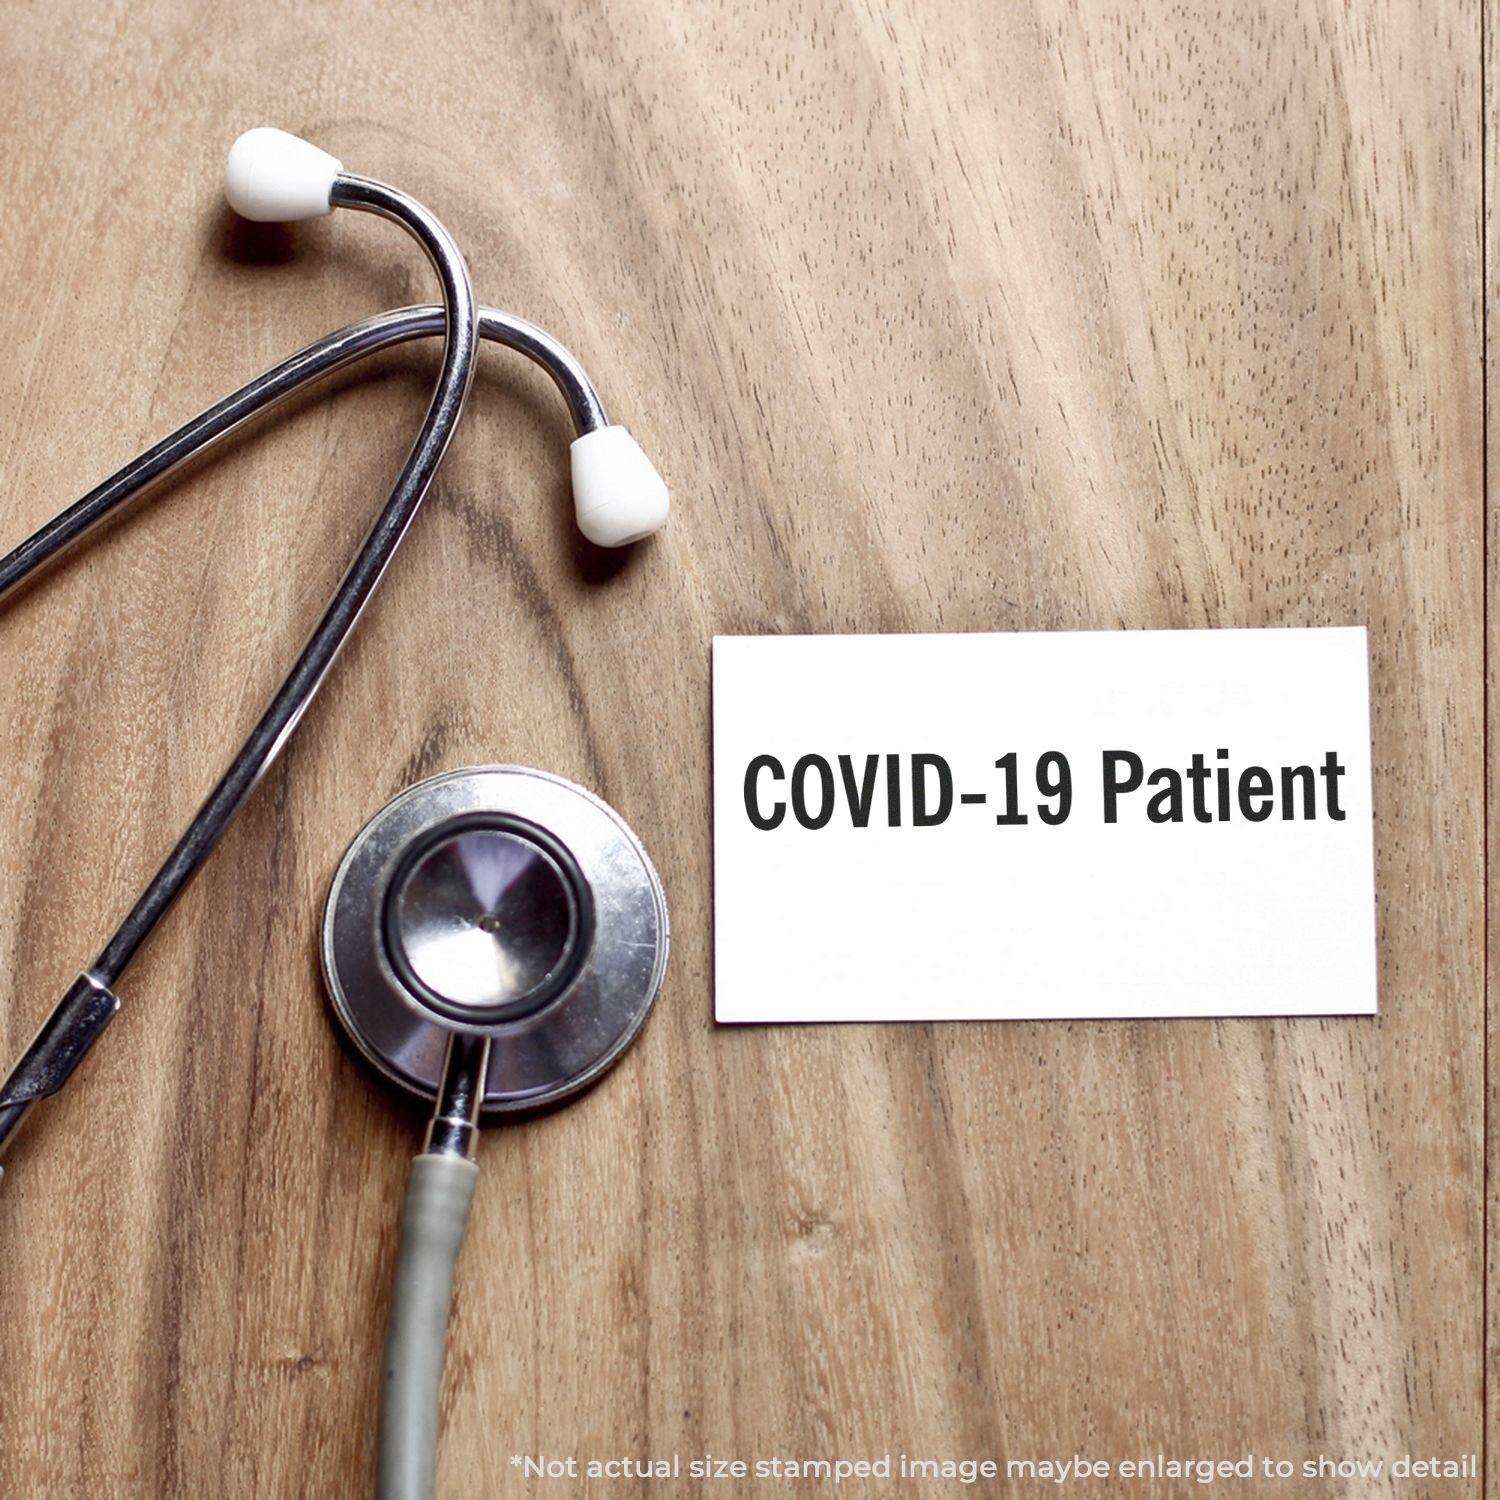 A stock office pre-inked stamp with a stamped image showing how the text "COVID-19 Patient" is displayed after stamping.